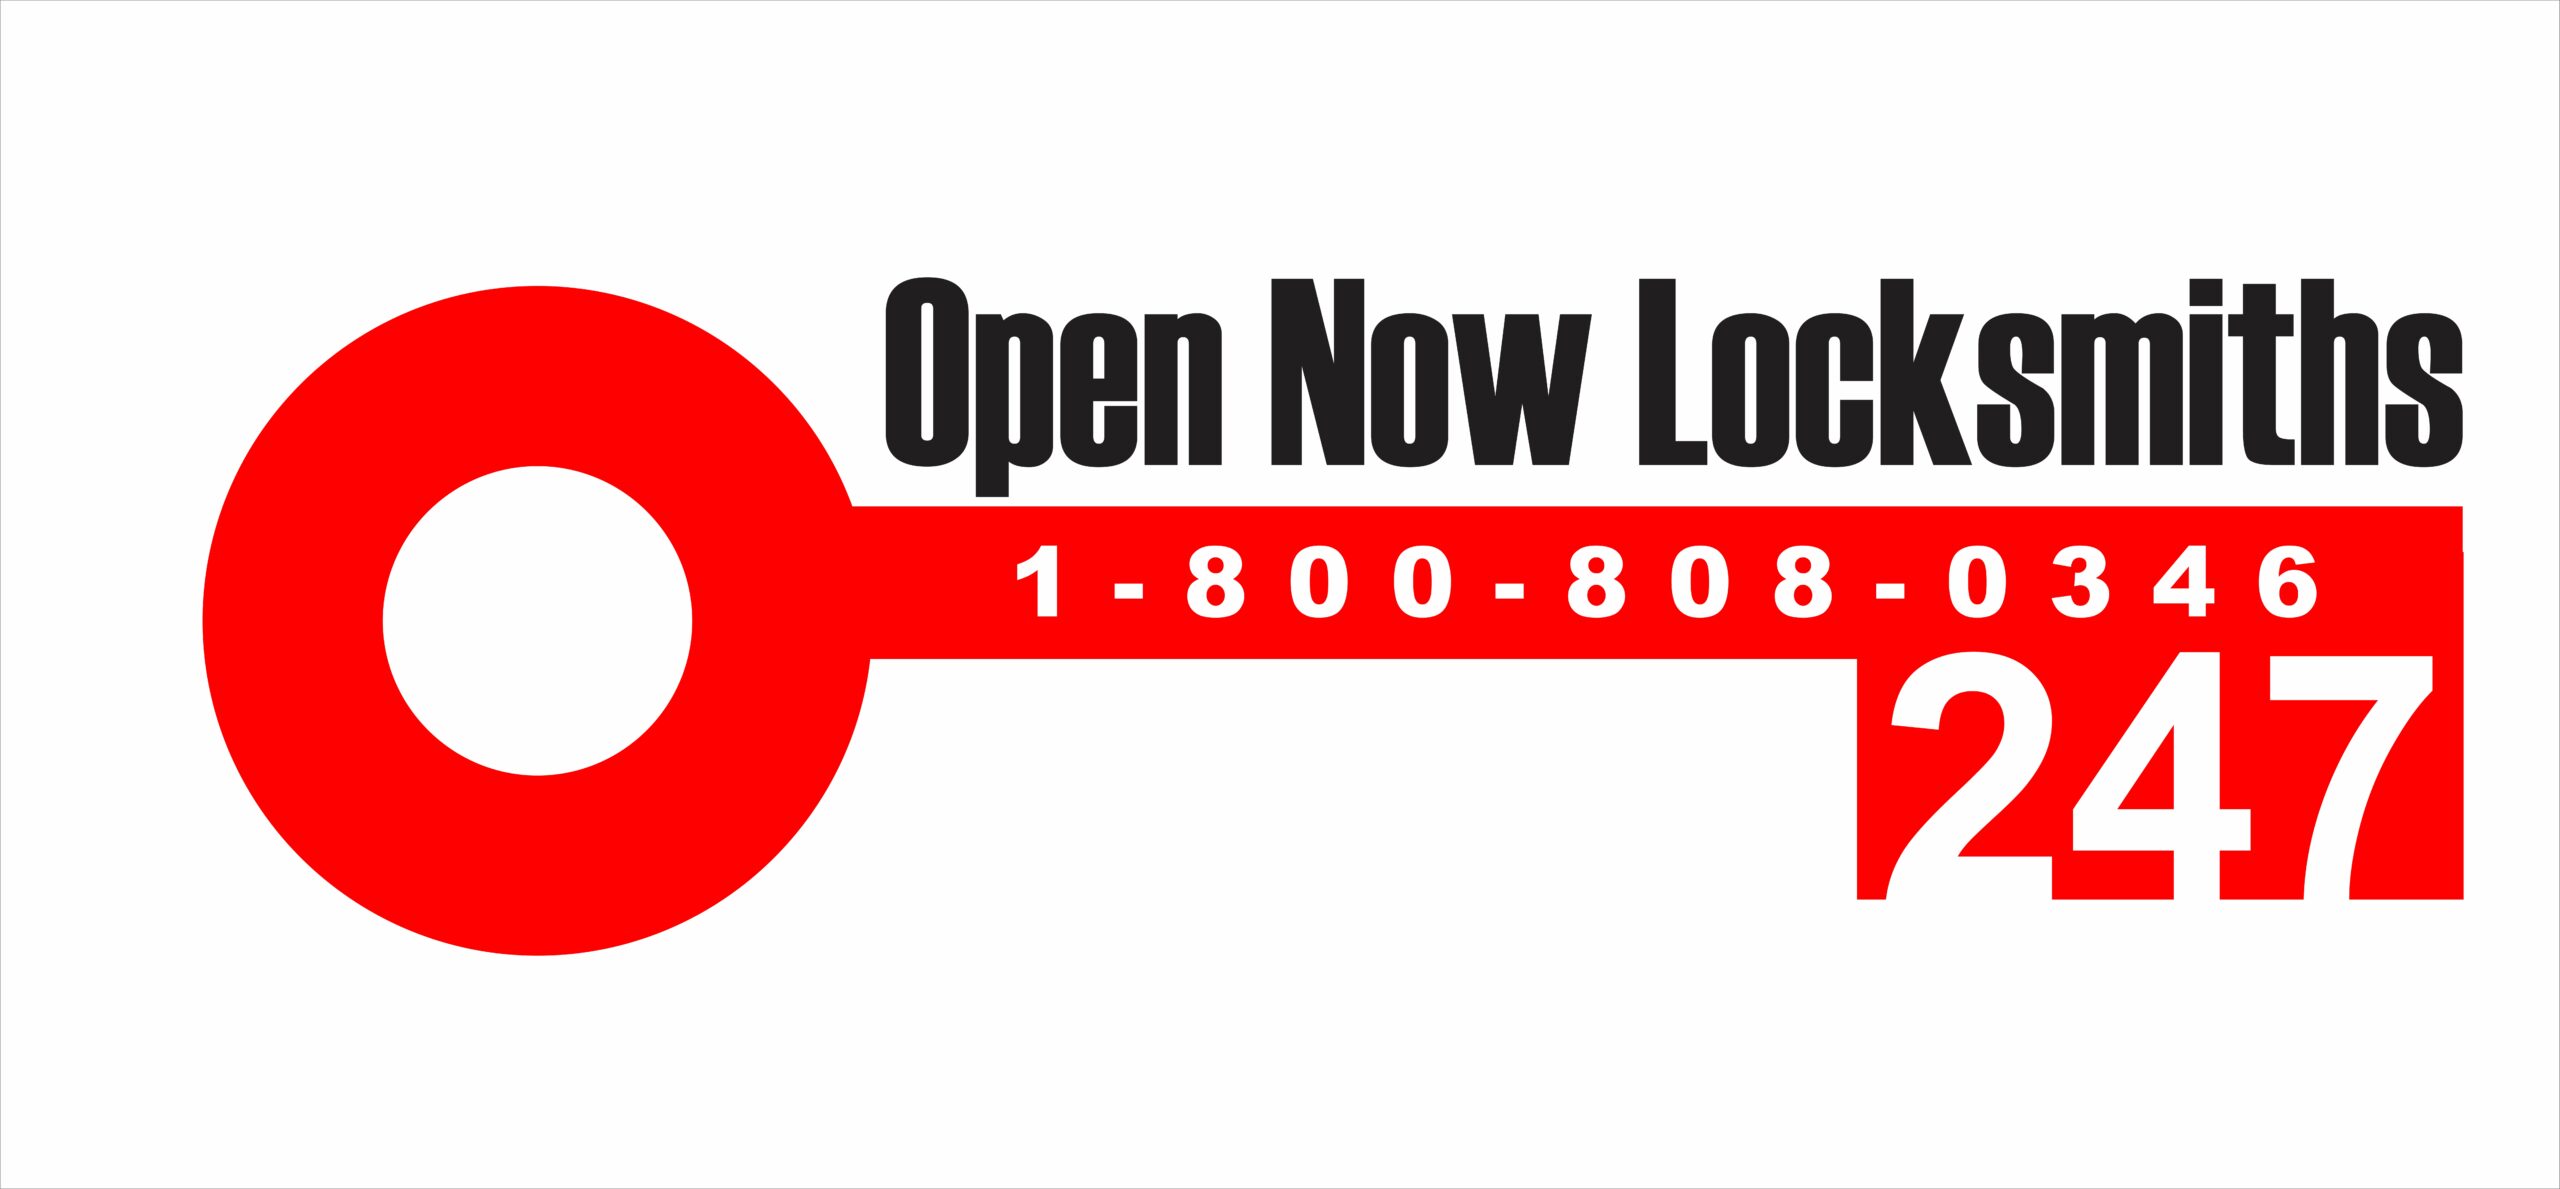 open now locksmith in Tampa FL